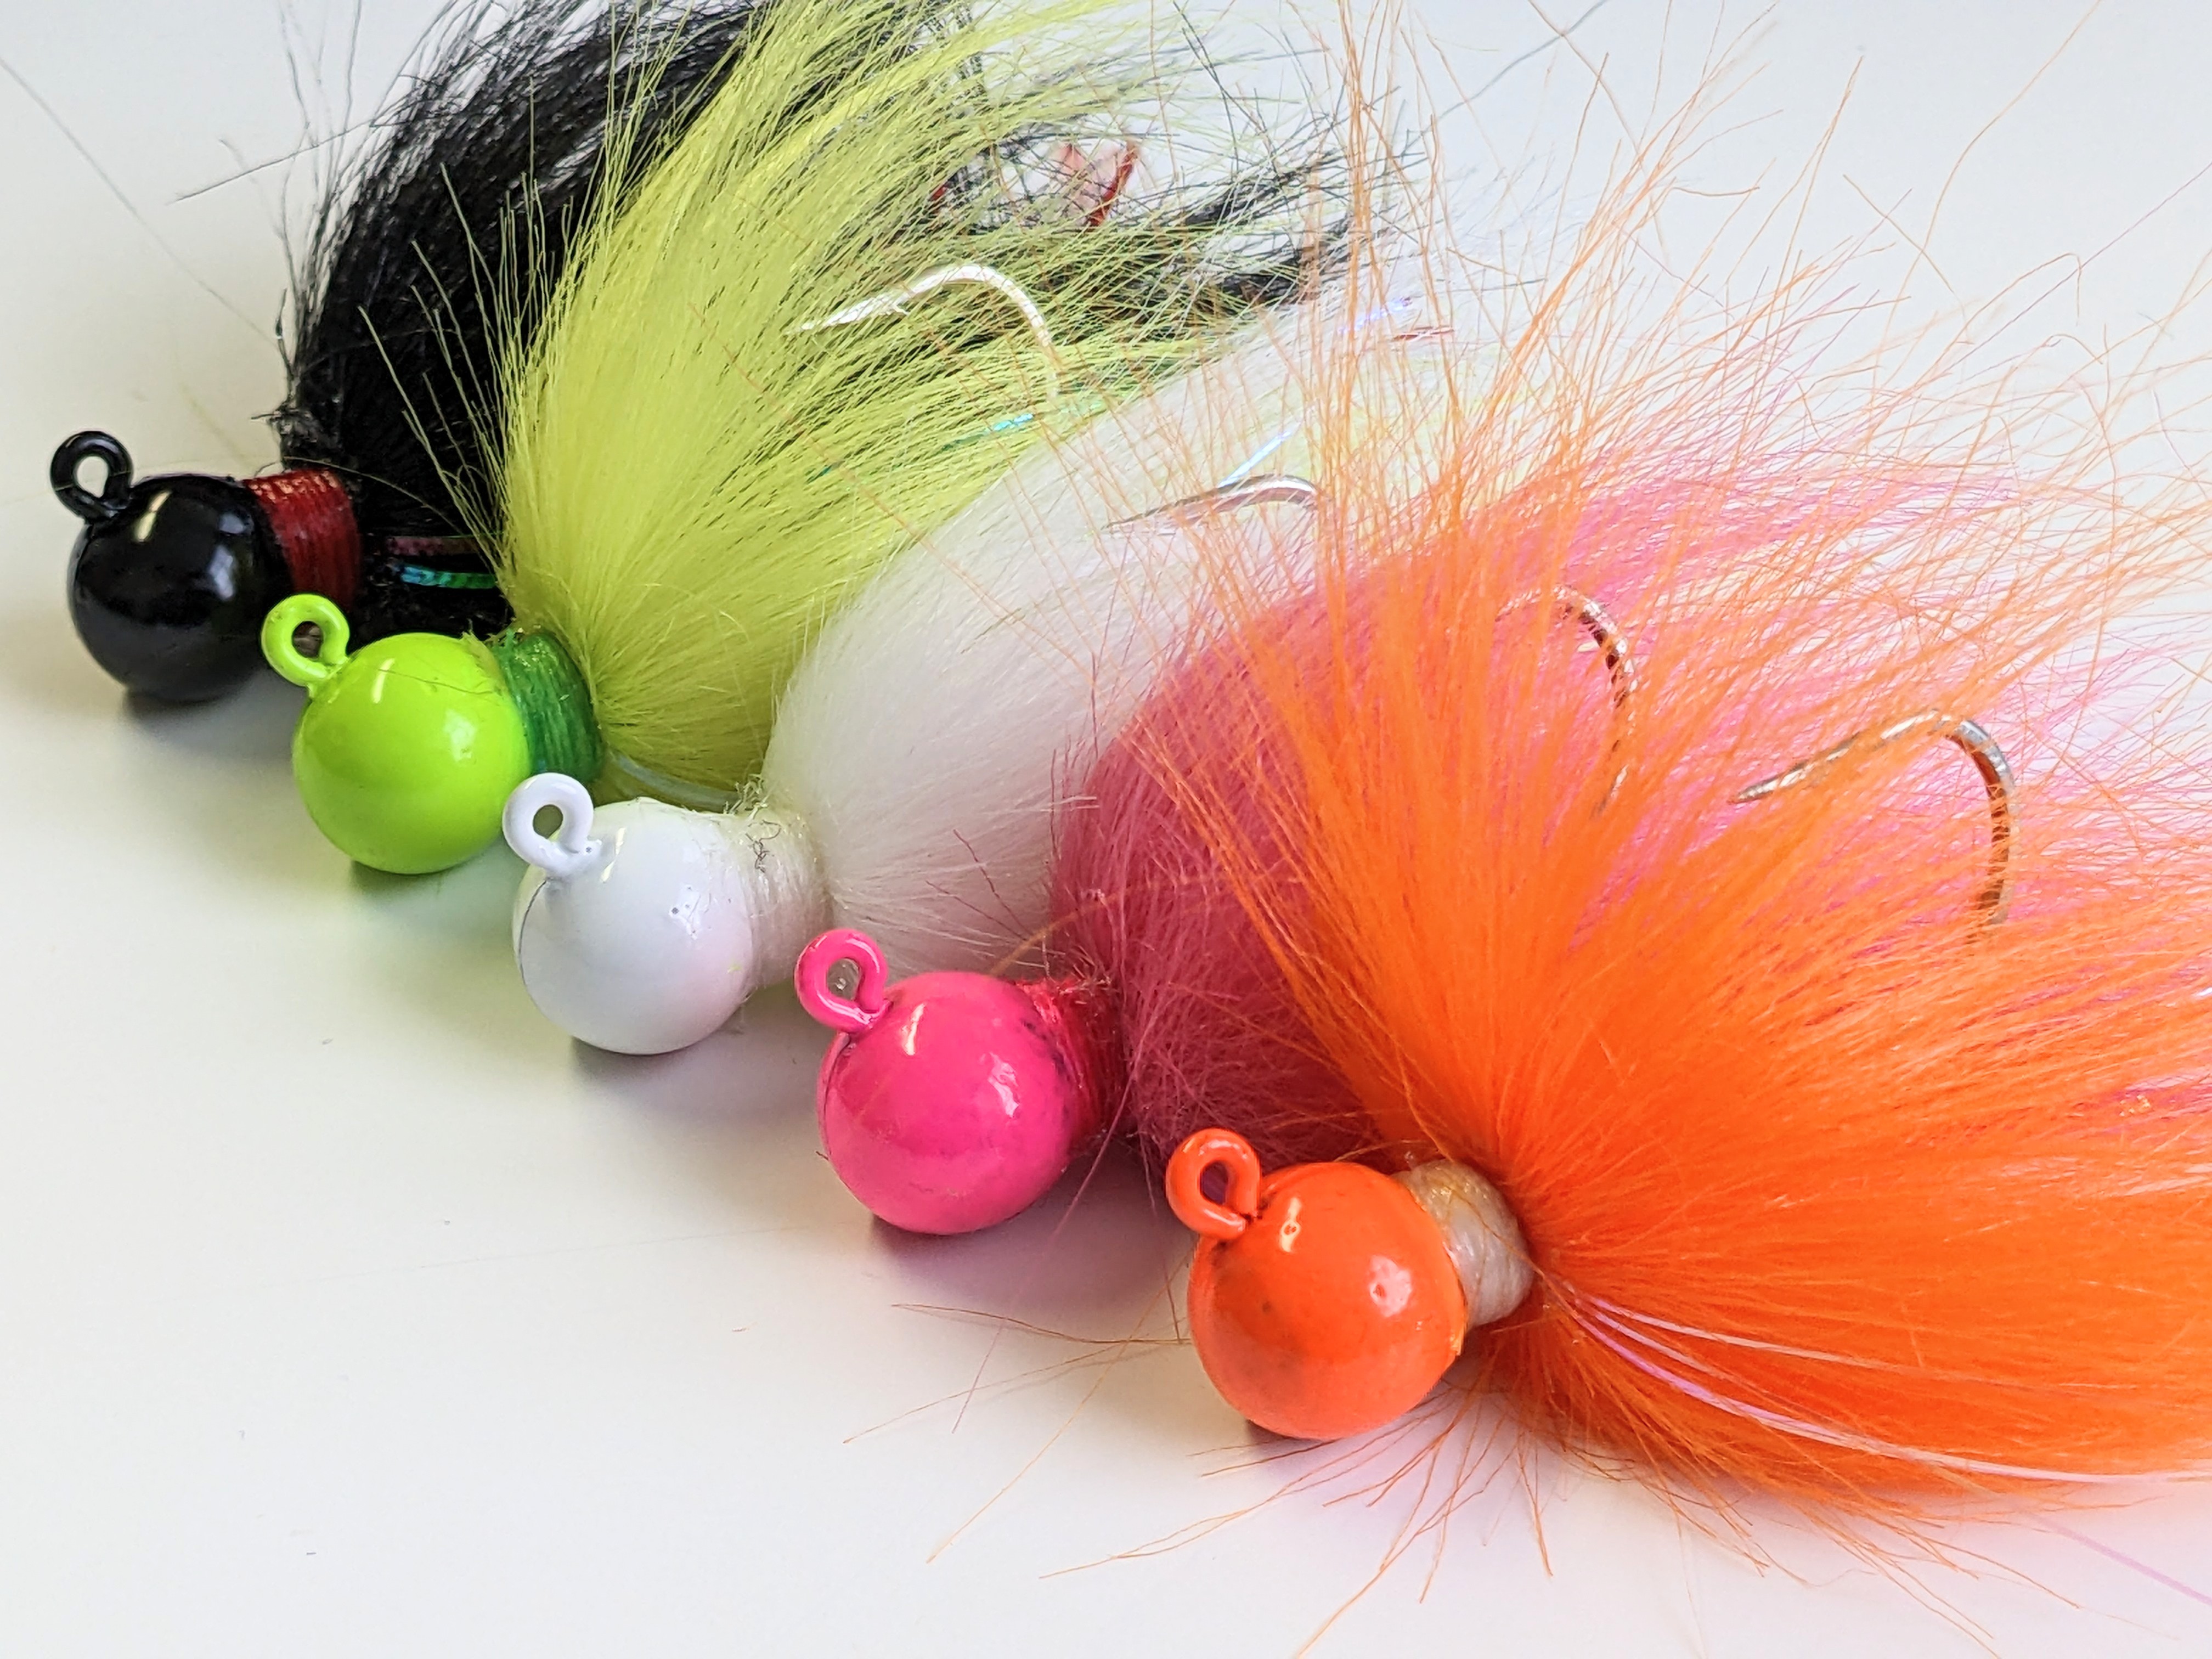 Bucktail jigs hand tied support Florida fishing/southern fishing saltwater  www..com/shop/MudMinnowlures